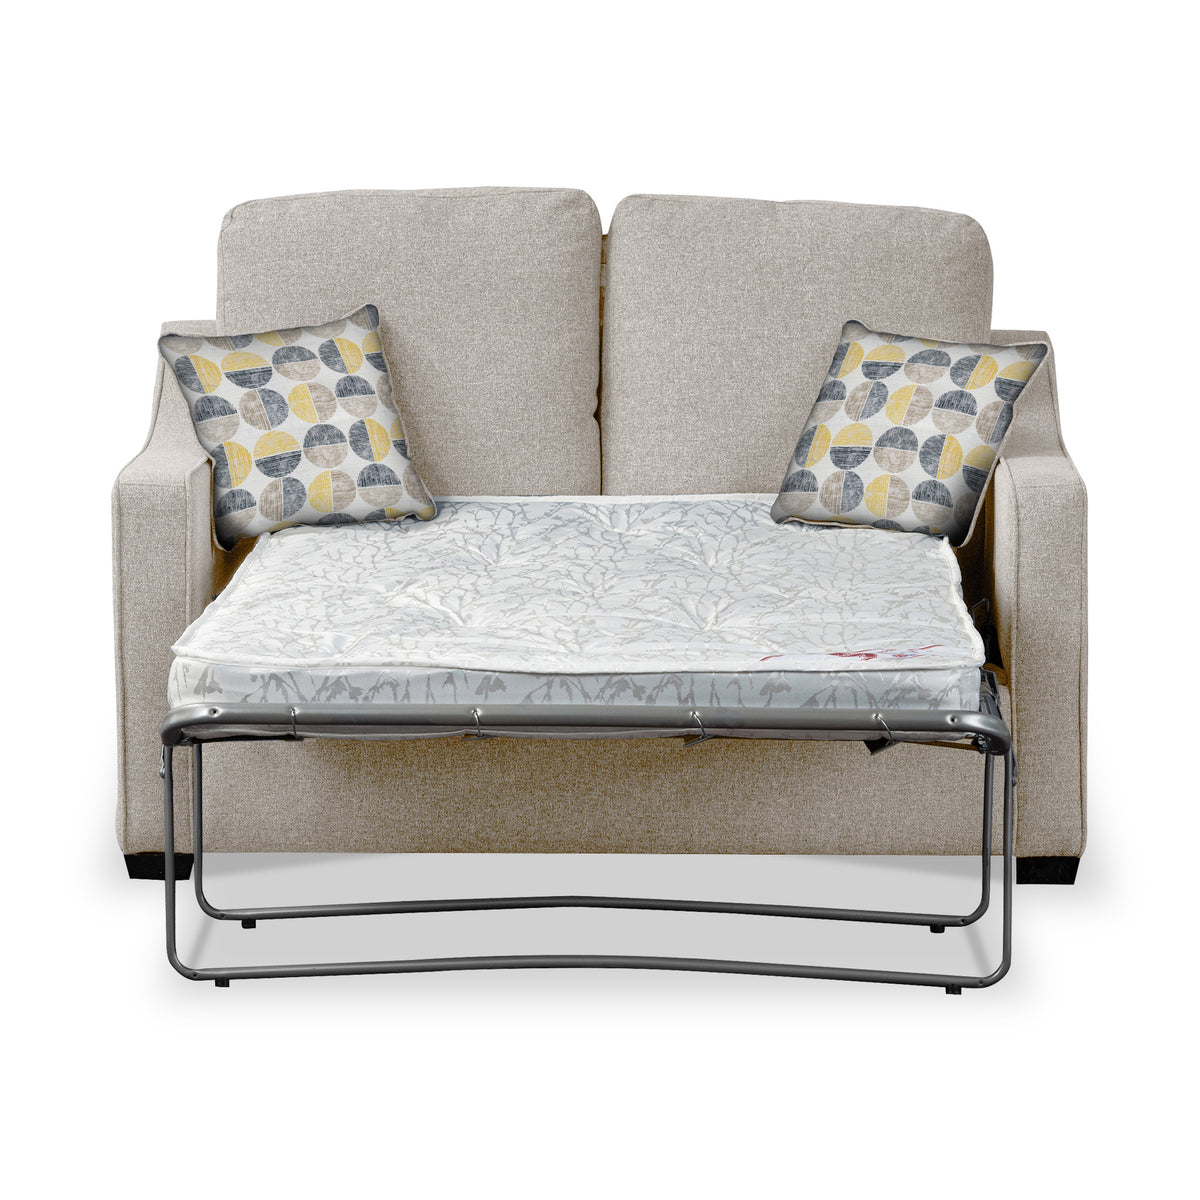 Fenton Oatmeal Soft Weave 2 Seater Sofabed with Beige Scatter Cushions from Roseland Furniture